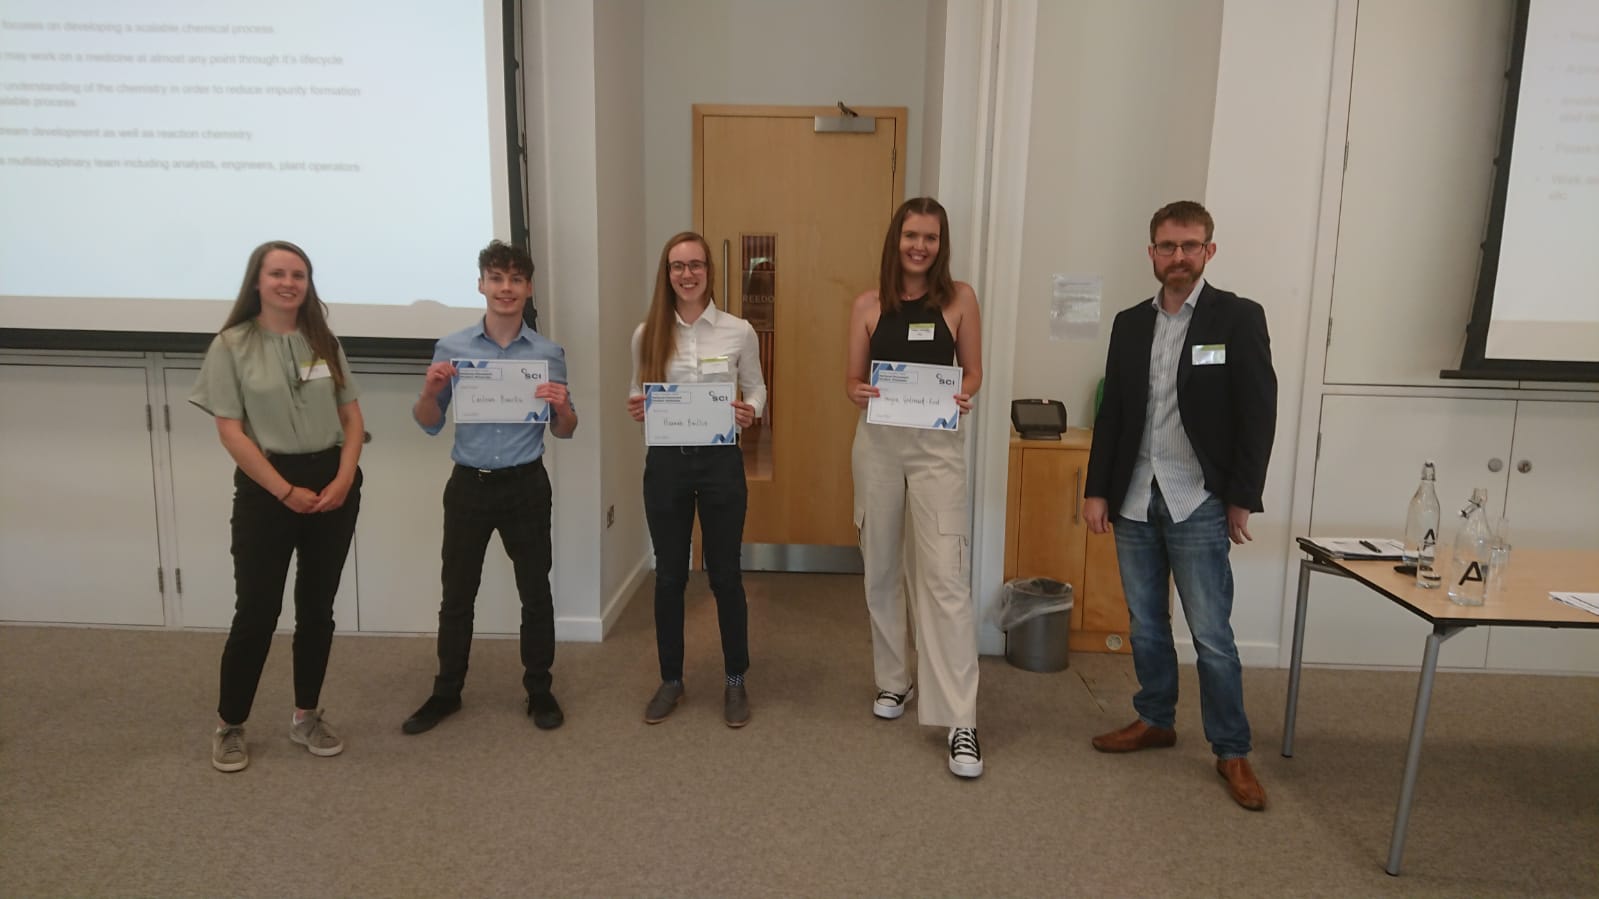 2022 SCI Placement Student Showcase Winners